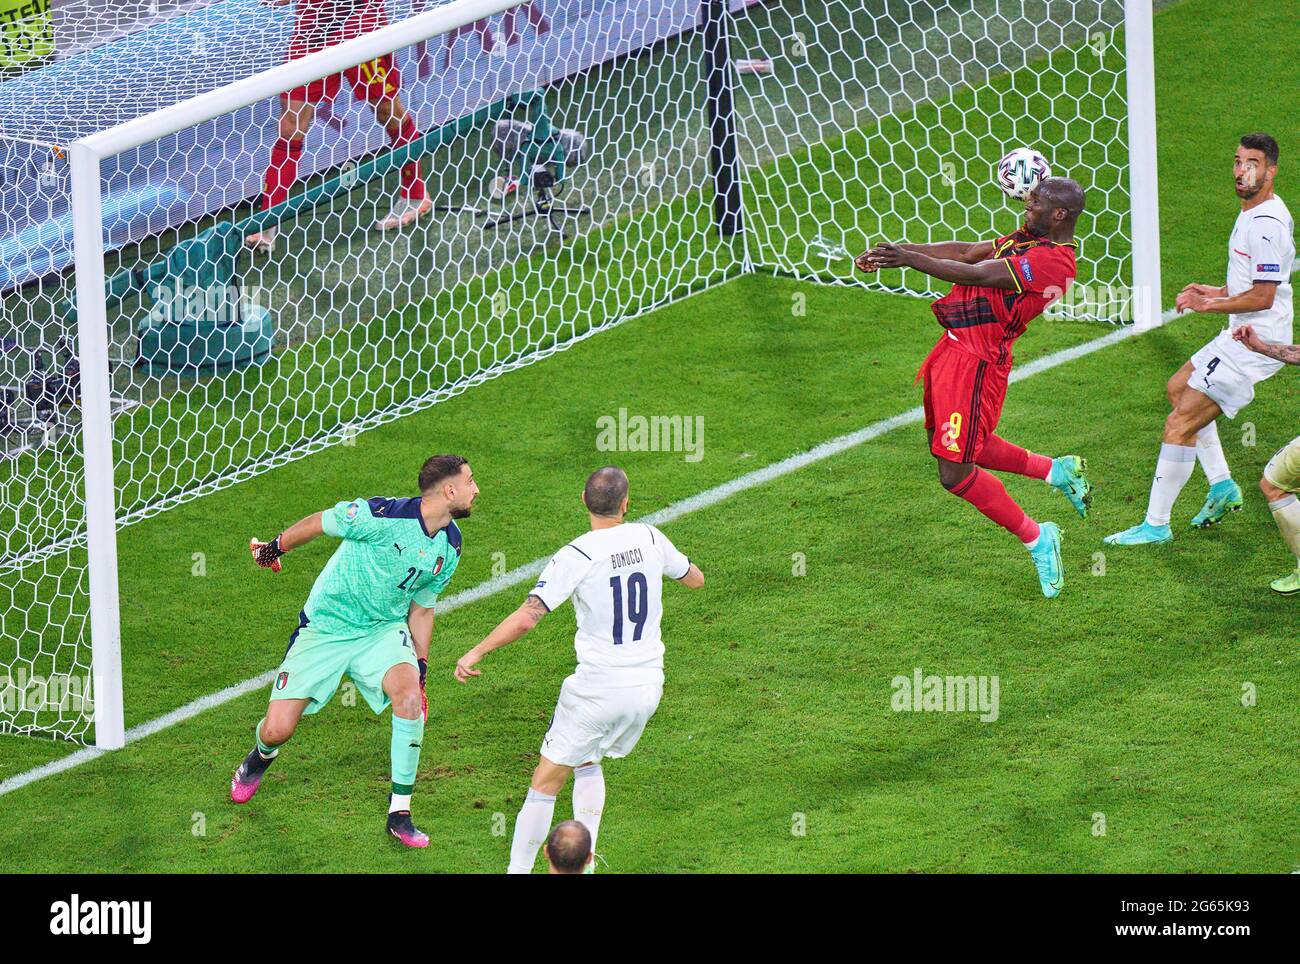 Romelu Lukaku, Belgium Nr.9 chance for goal in the quarterfinal match BELGIUM - ITALY  at the football UEFA European Championships 2020 in Season 2020/2021 on July 02, 2021  in Munich, Germany. © Peter Schatz / Alamy Live News Stock Photo